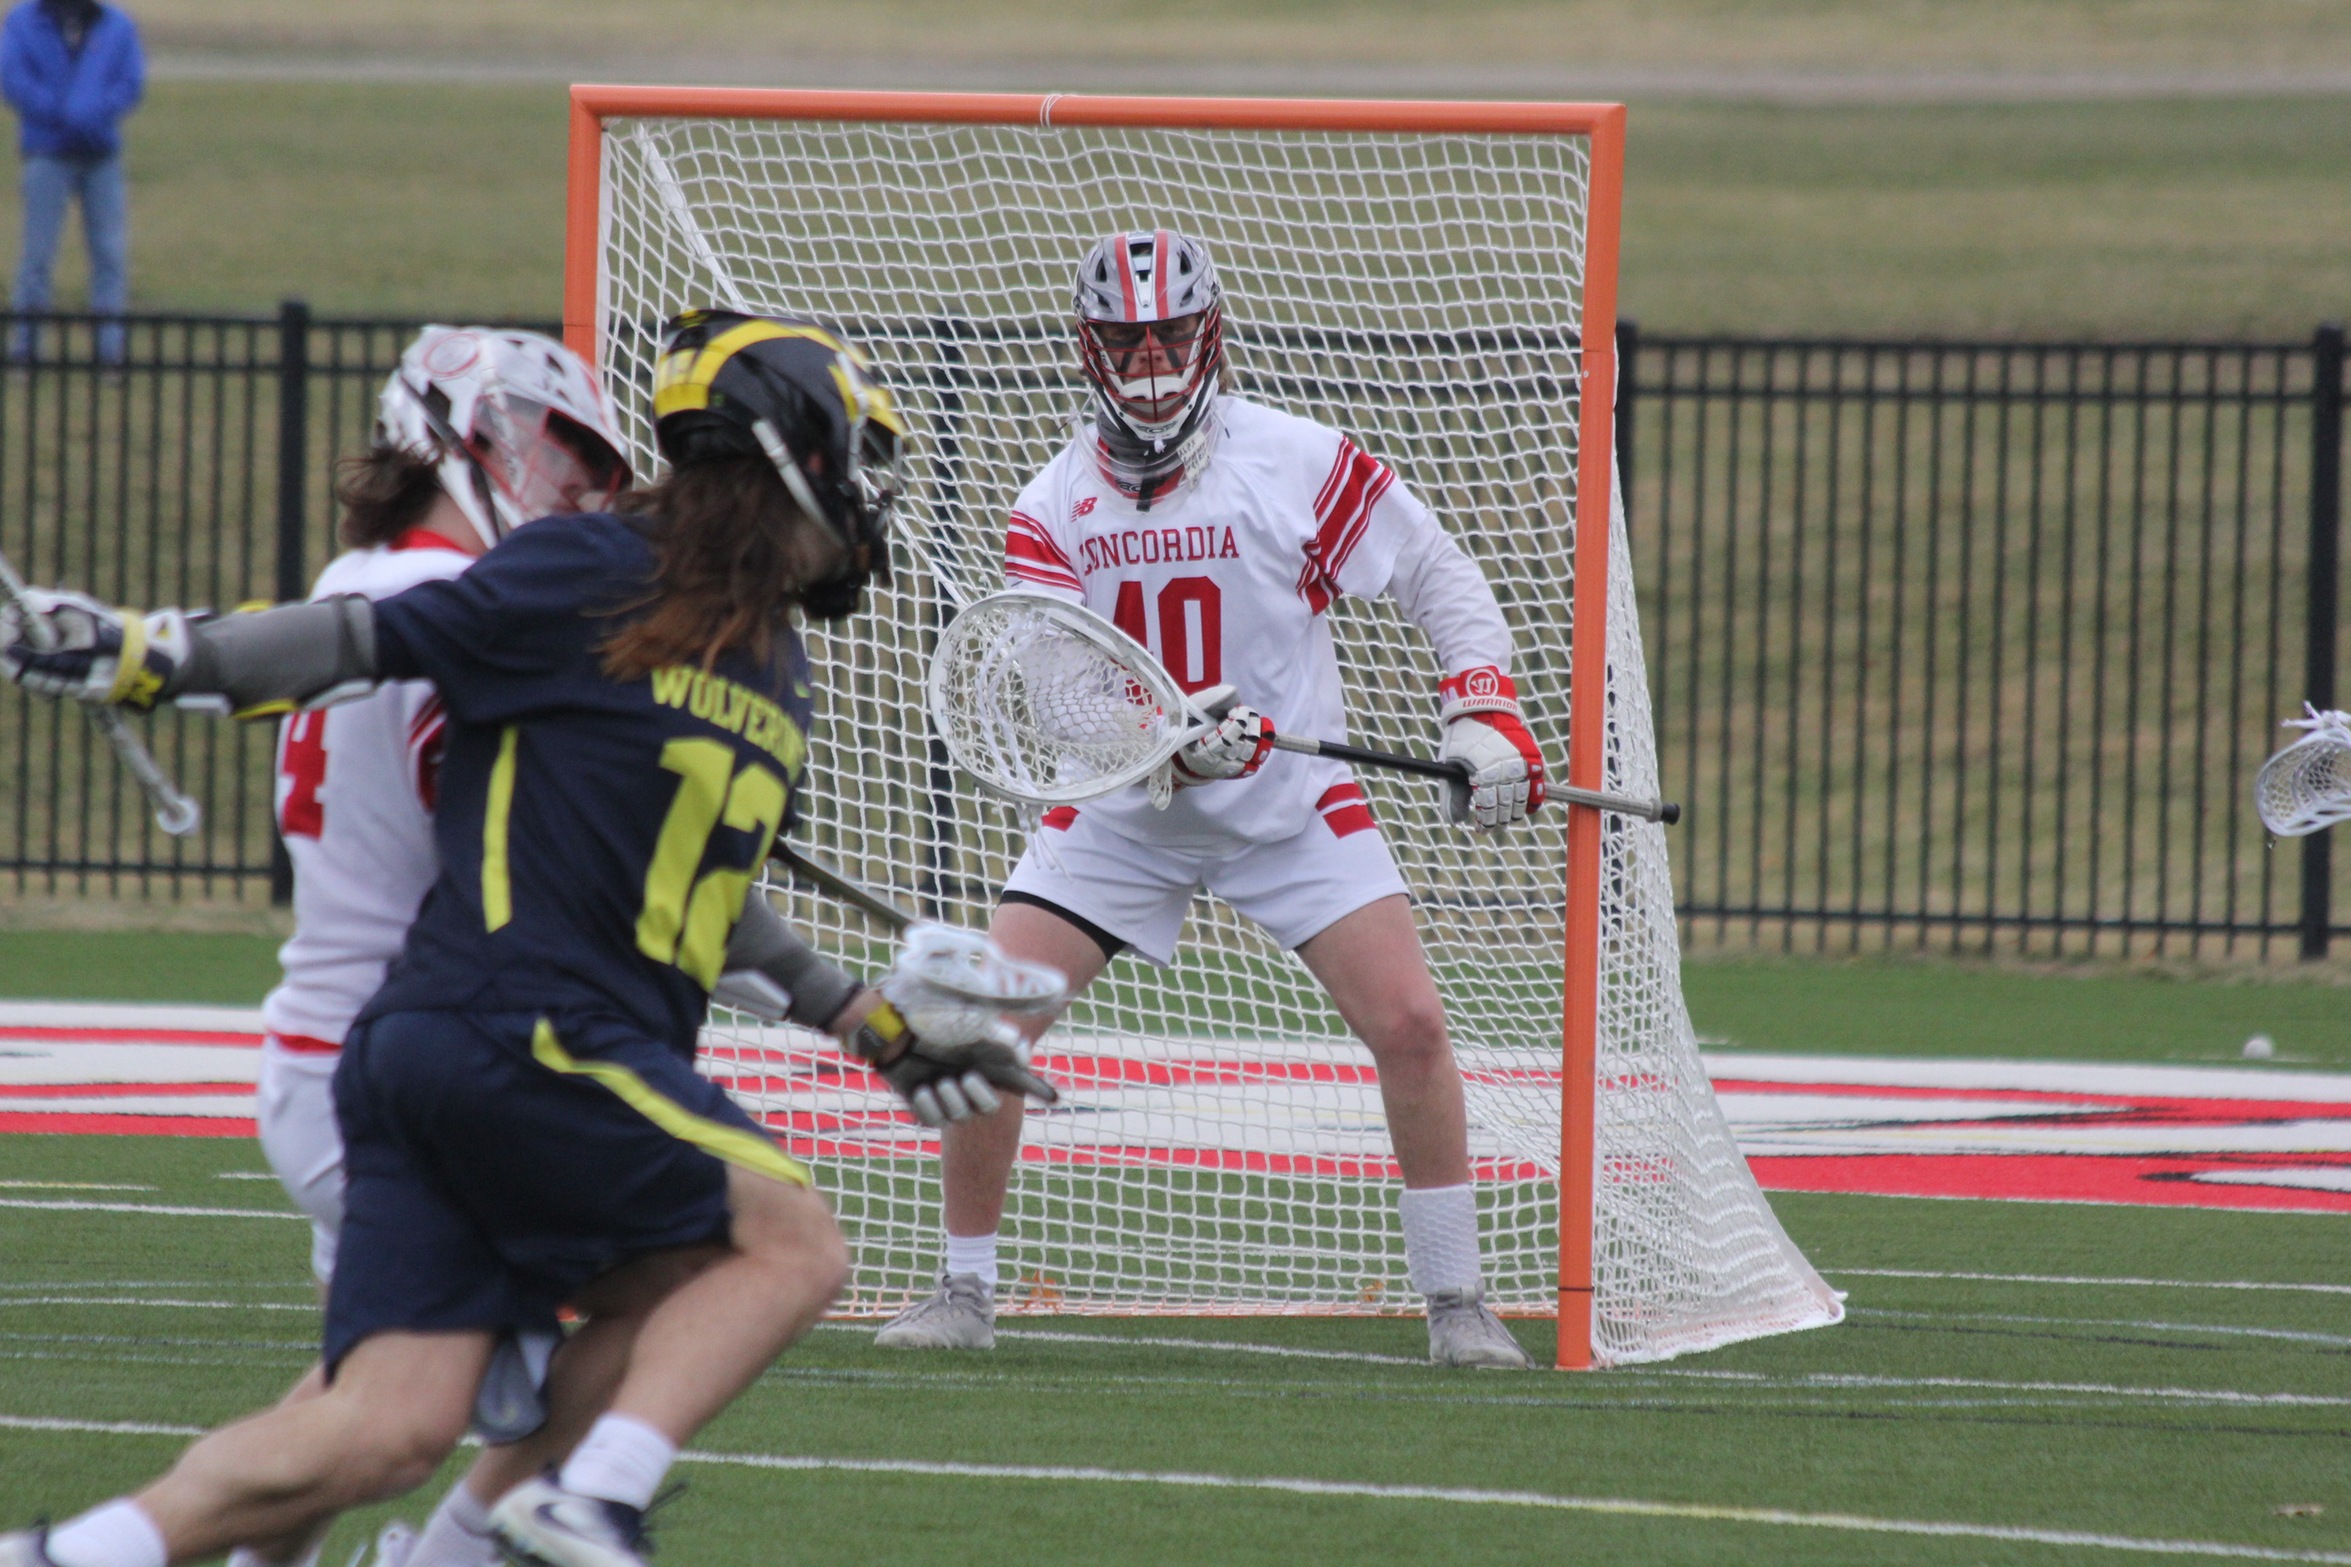 Men's Lacrosse falls in close contest with Tennessee Wesleyan